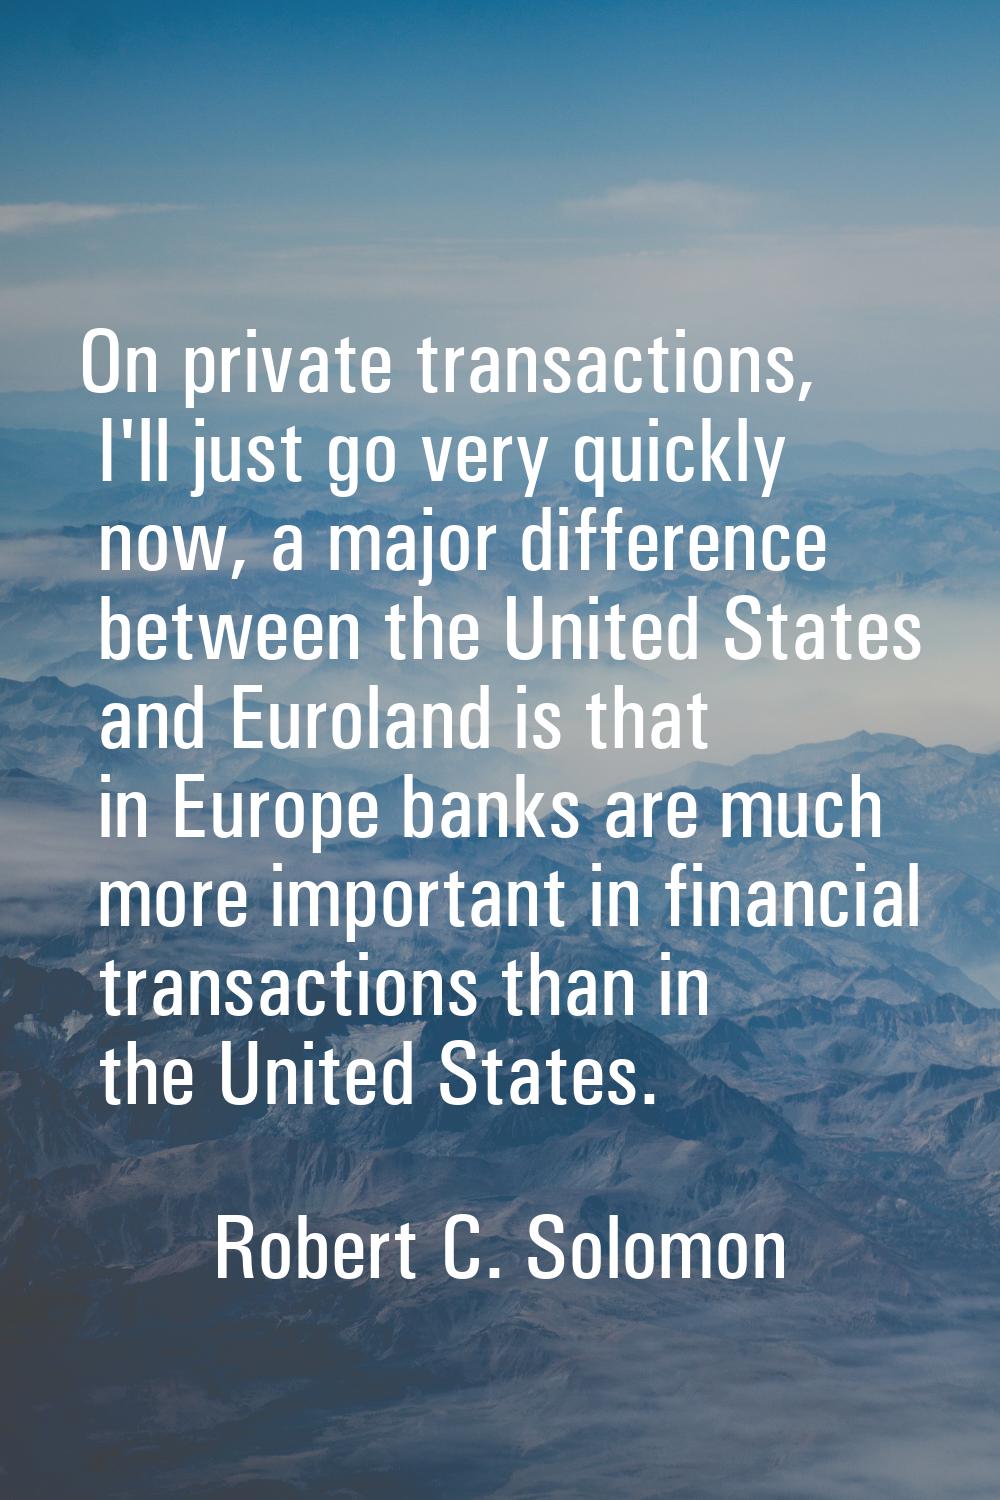 On private transactions, I'll just go very quickly now, a major difference between the United State